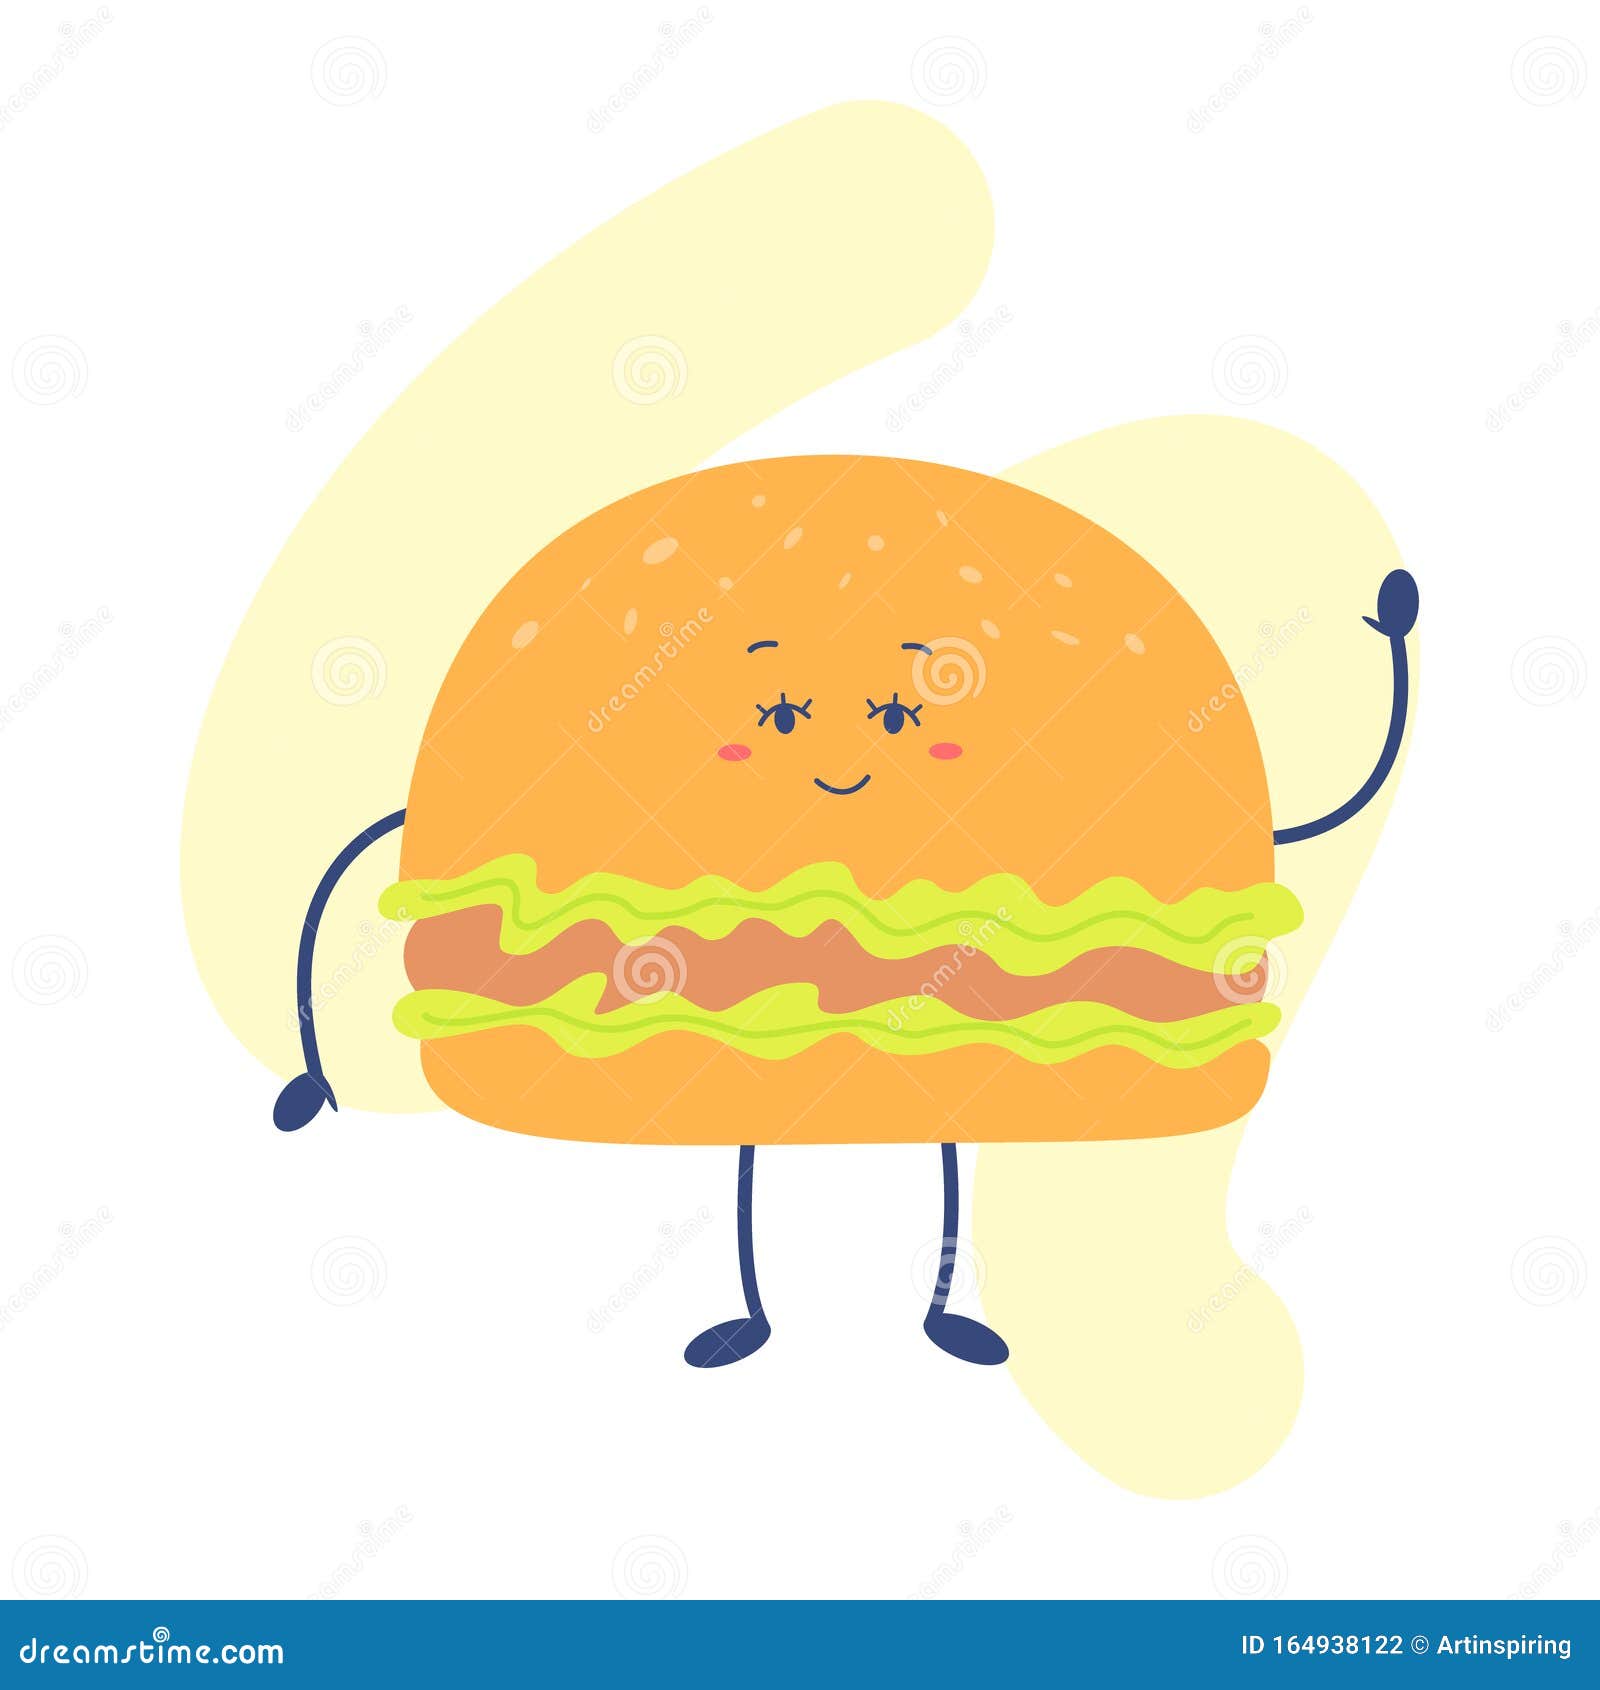 Funny Fast Food with Cute Face. Junk Food, Burger with Happy Smiling Face  Stock Vector - Illustration of drink, happy: 164938122